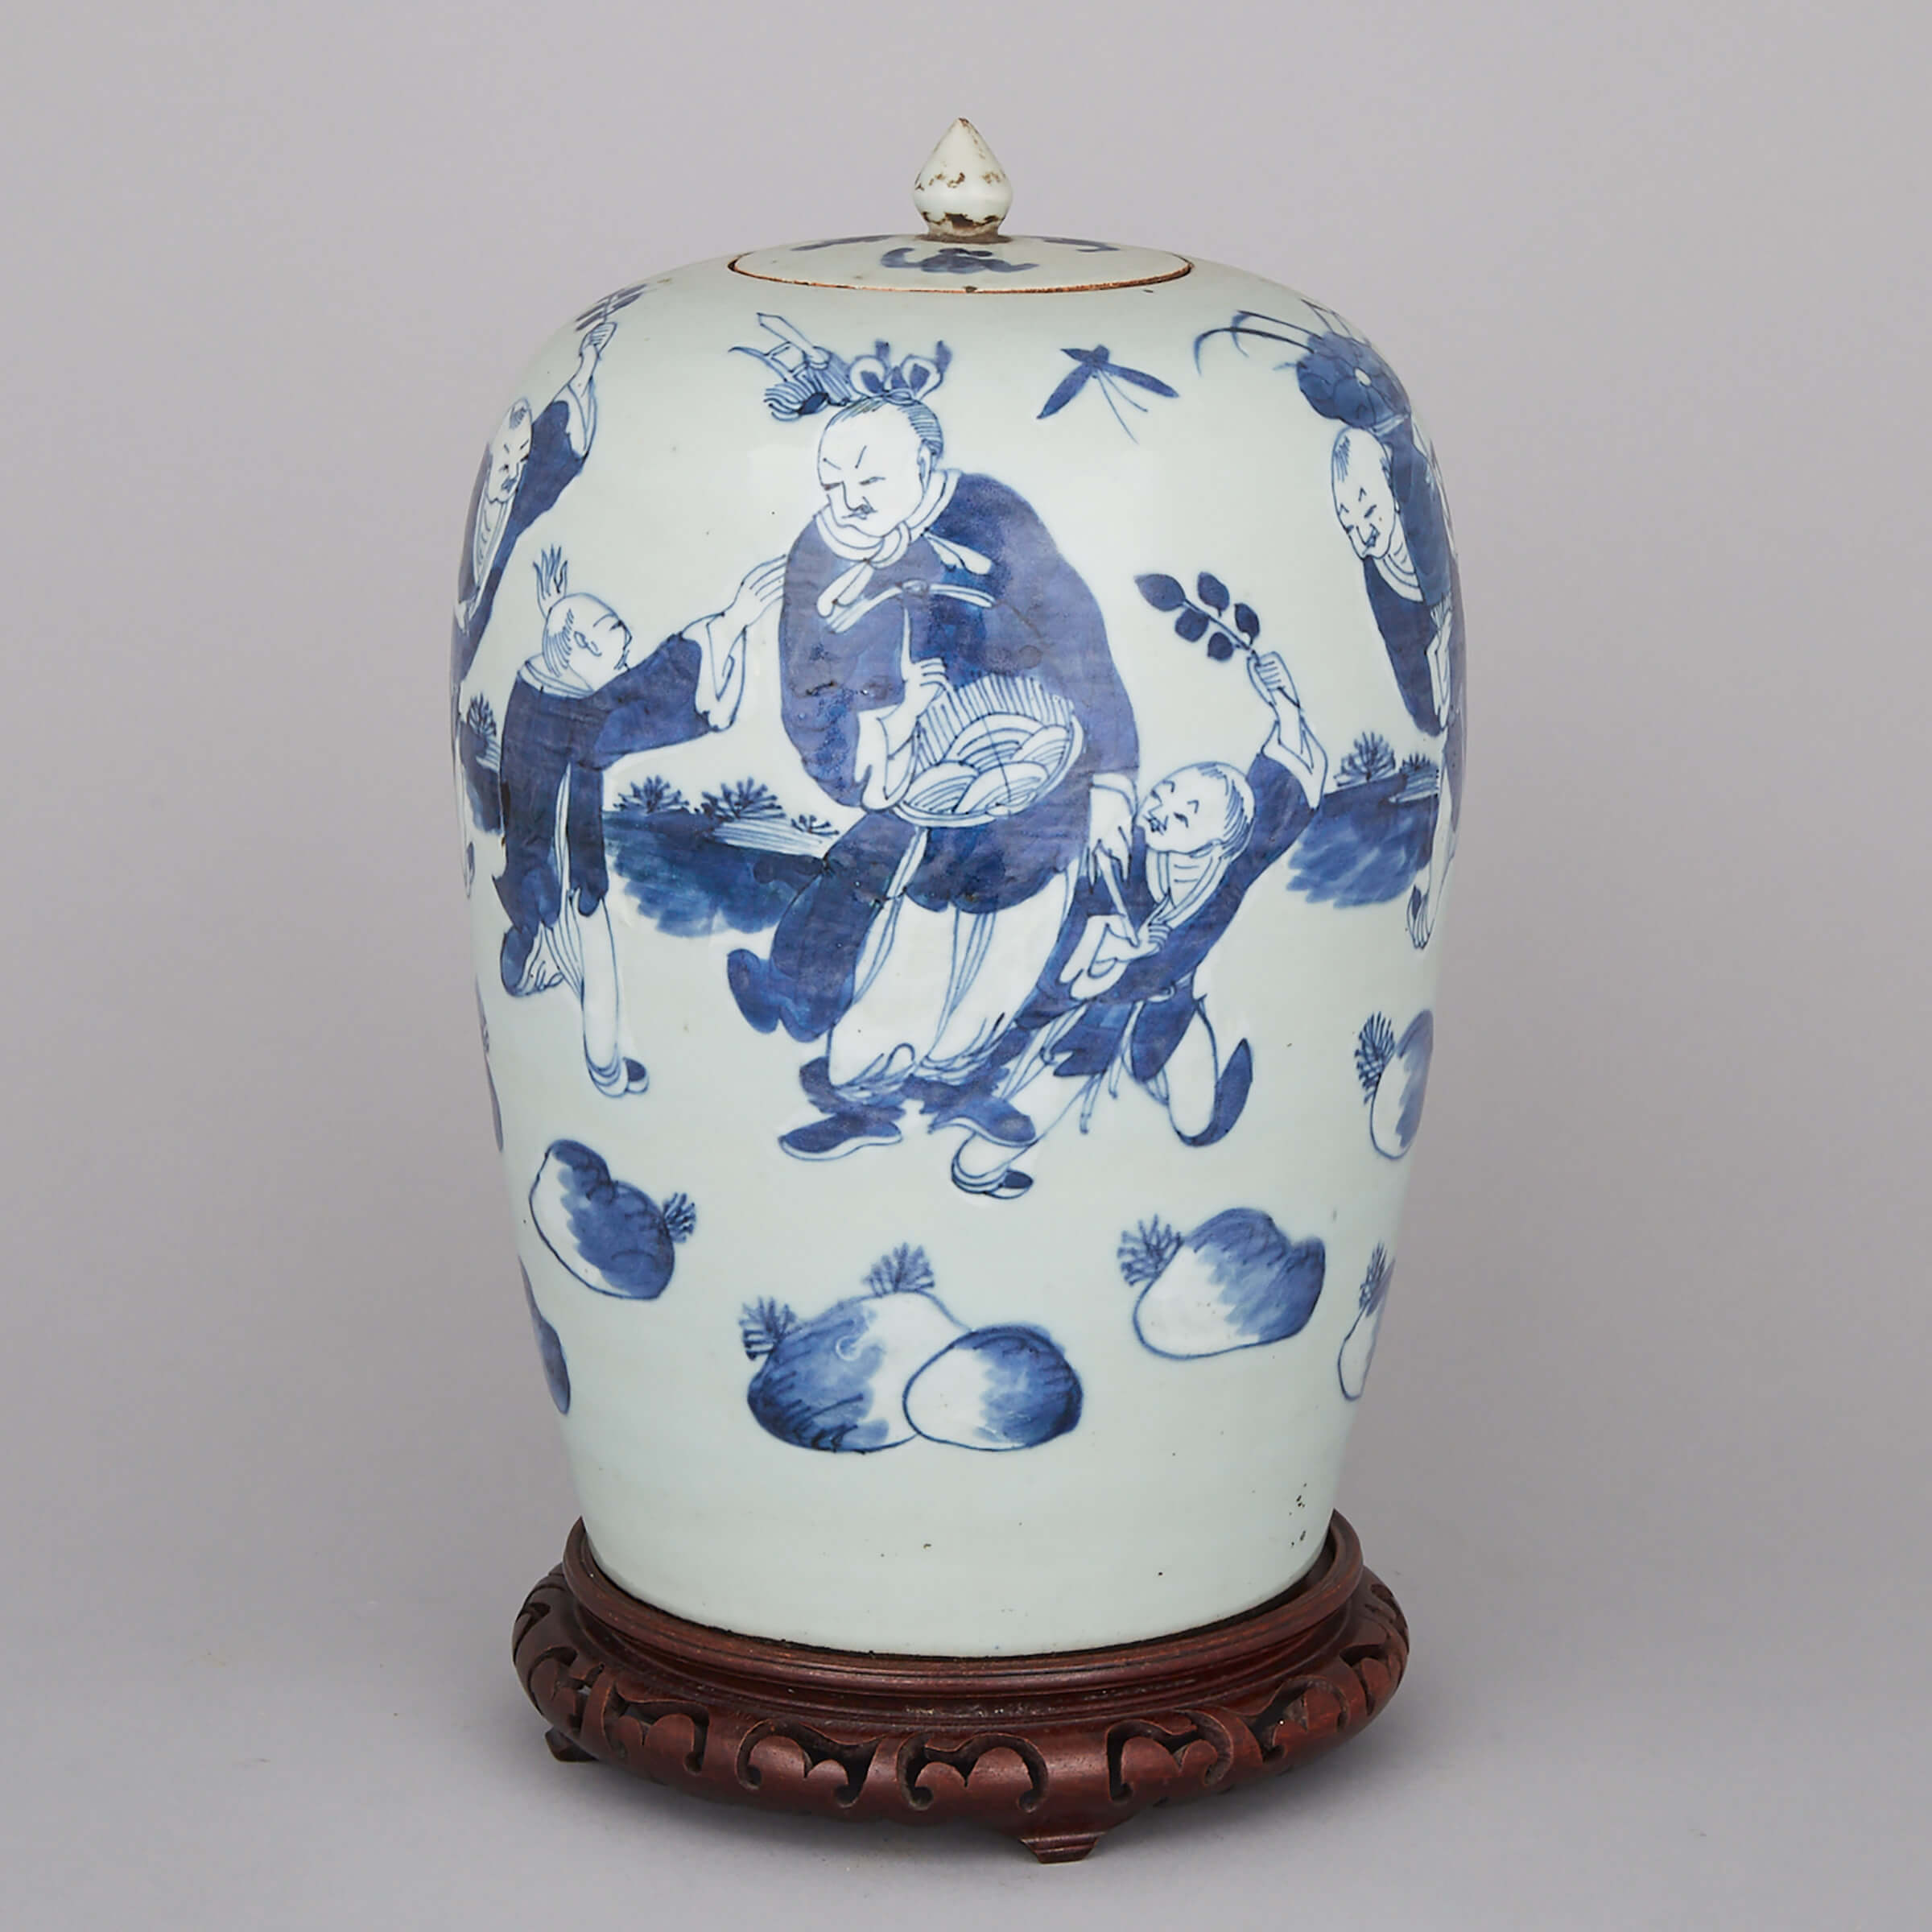 A Blue and White Celadon Ground Jar with Lid